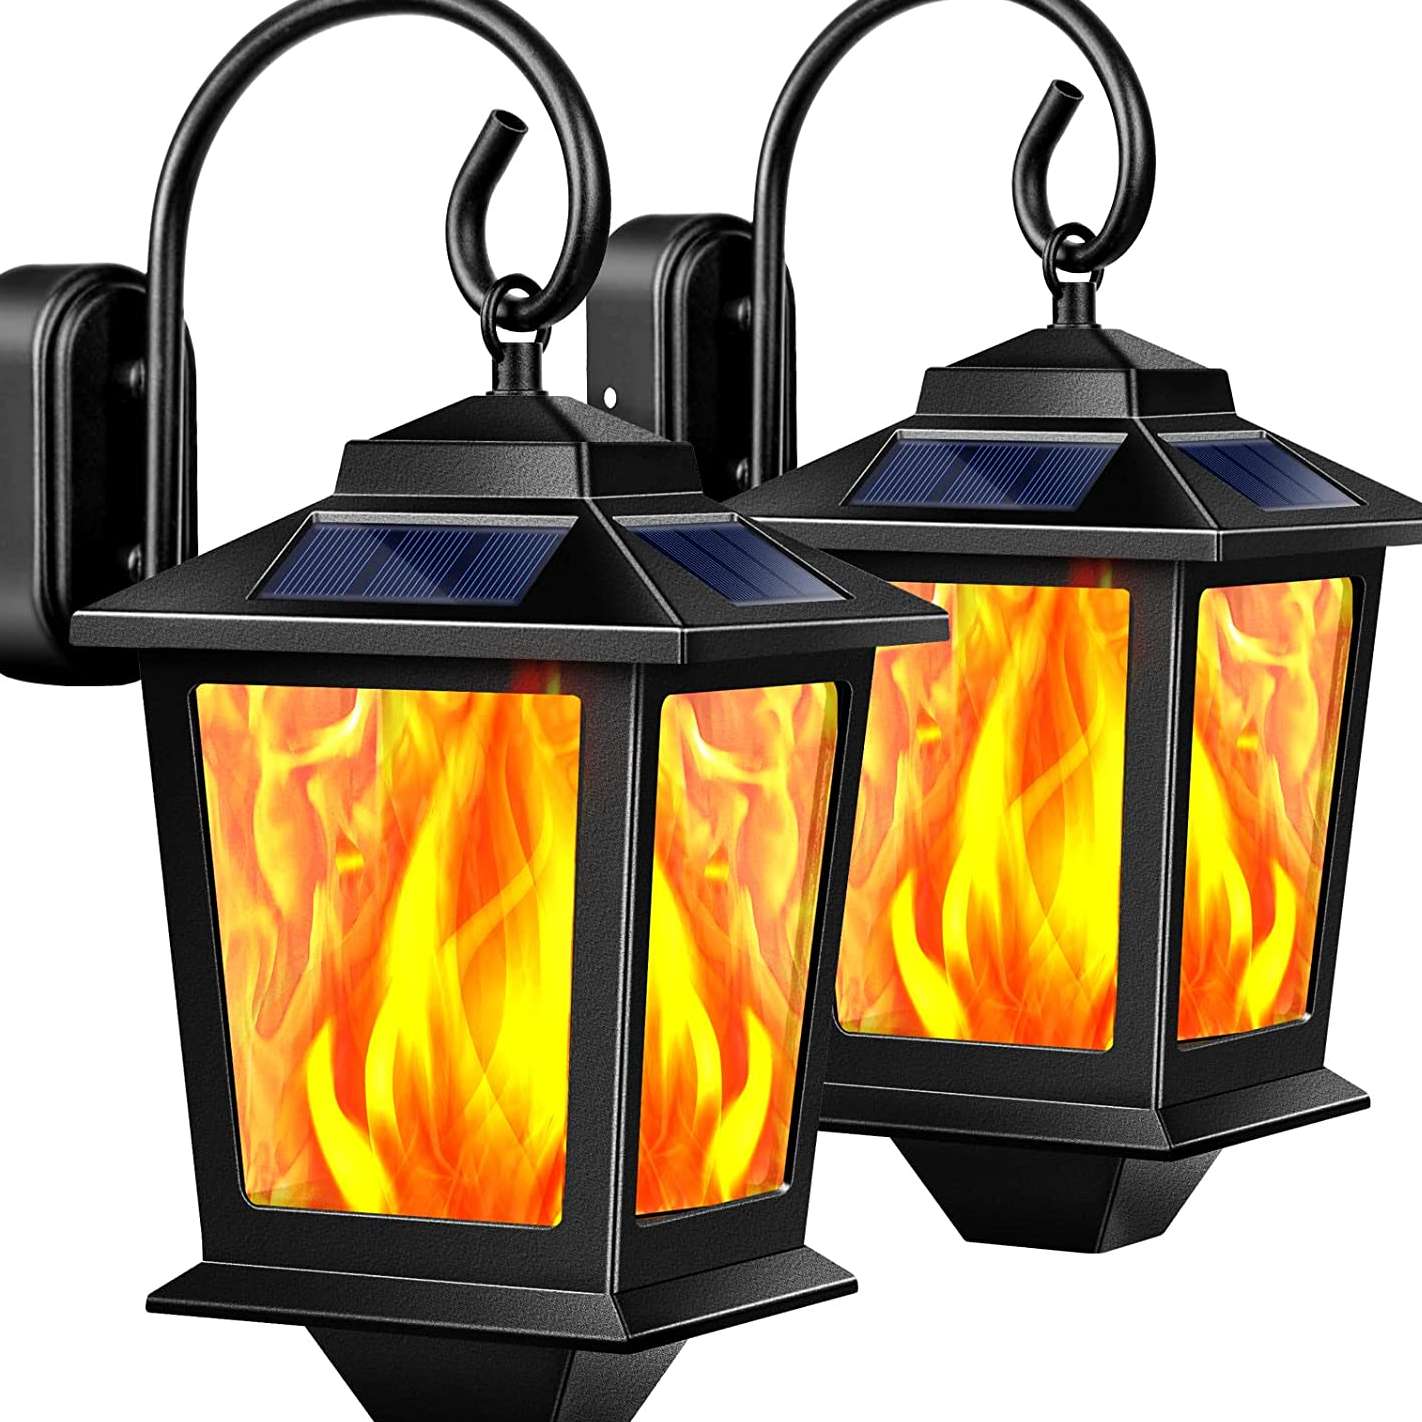 TomCare Solar Lights Outdoor Flickering Flame Metal Solar Lantern Anti-Rust Waterproof Solar Wall Lights Hanging Outdoor Lighting Solar Powered Decorative Flame Lights for Patio Porch Yard, 2 Pack